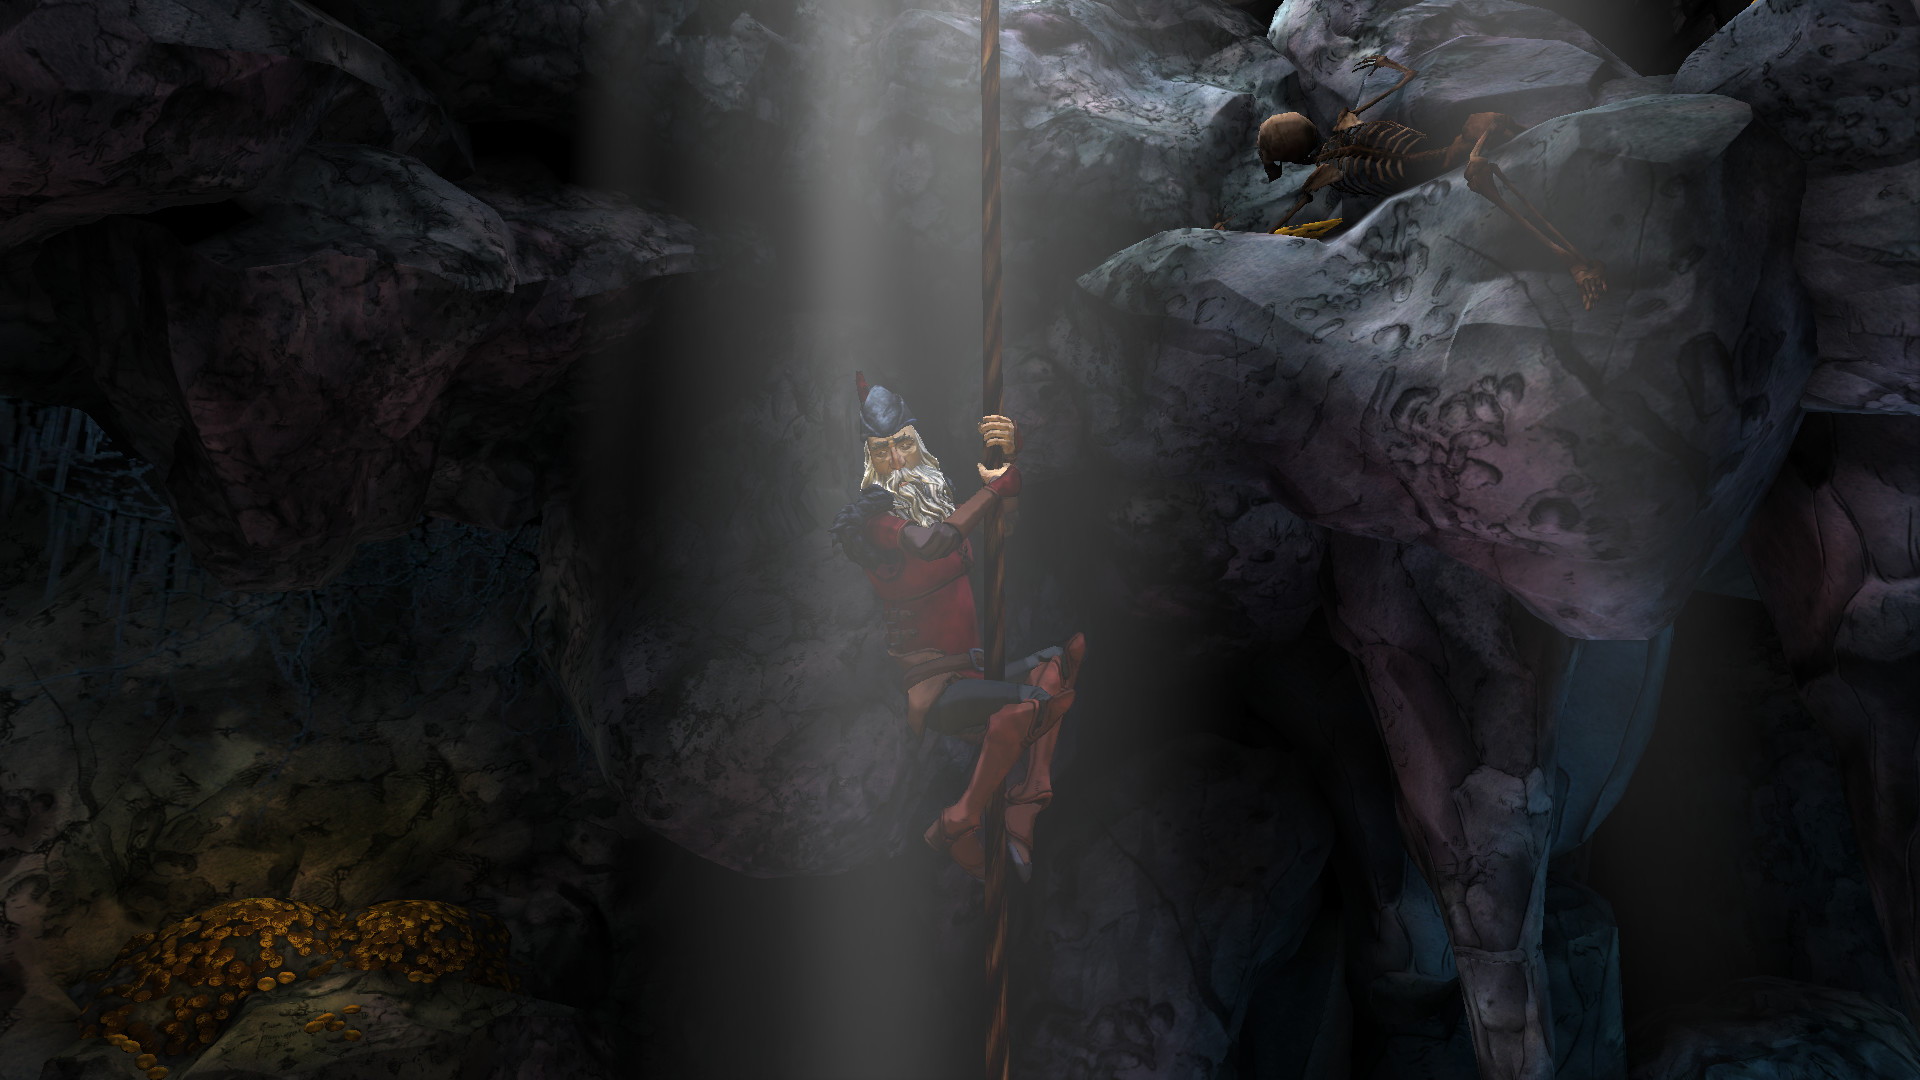 King's Quest - Chapter 5: The Good Knight - screenshot 6